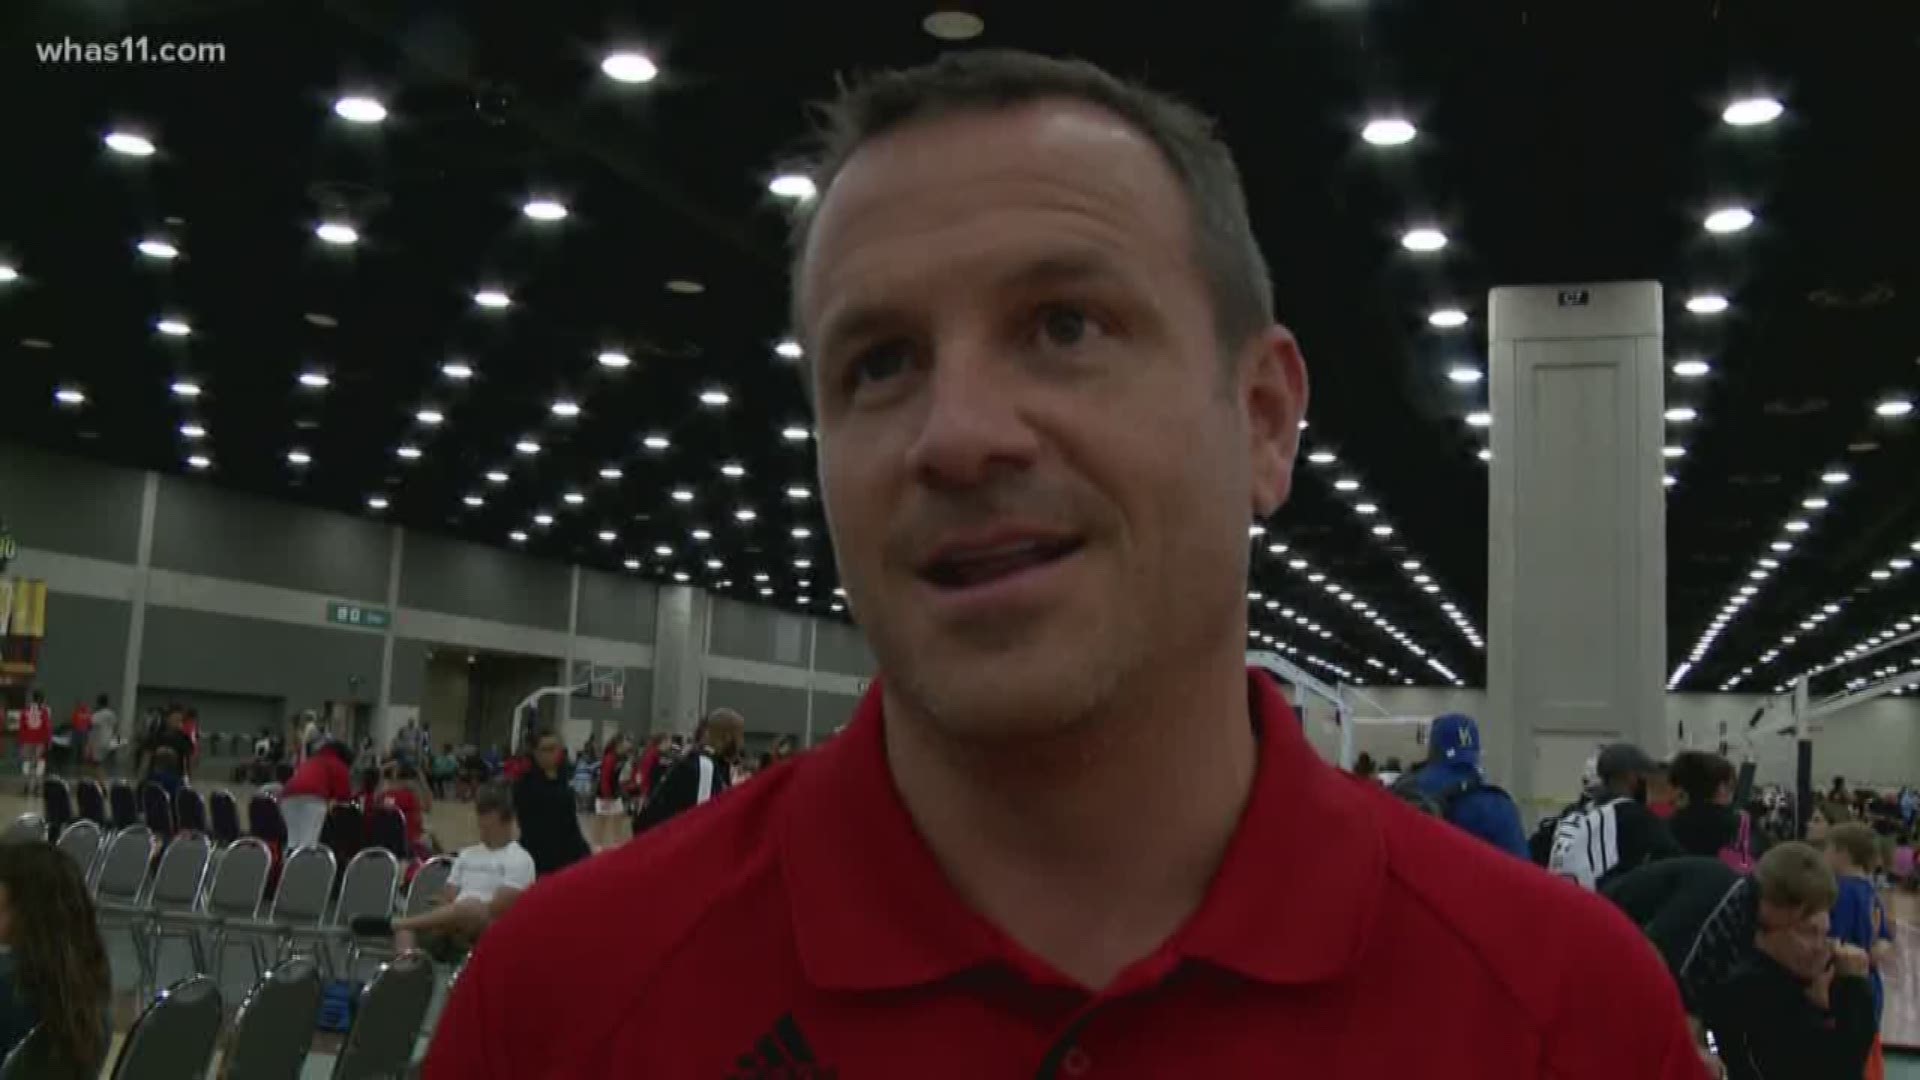 Did you know Louisville's Coach Jeff Walz can cook? The head basketball coach for the Lady Cards will be a "Celebrity Chef" at Vincenzo's Kentucky Derby Festival fundraising event this Sunday.